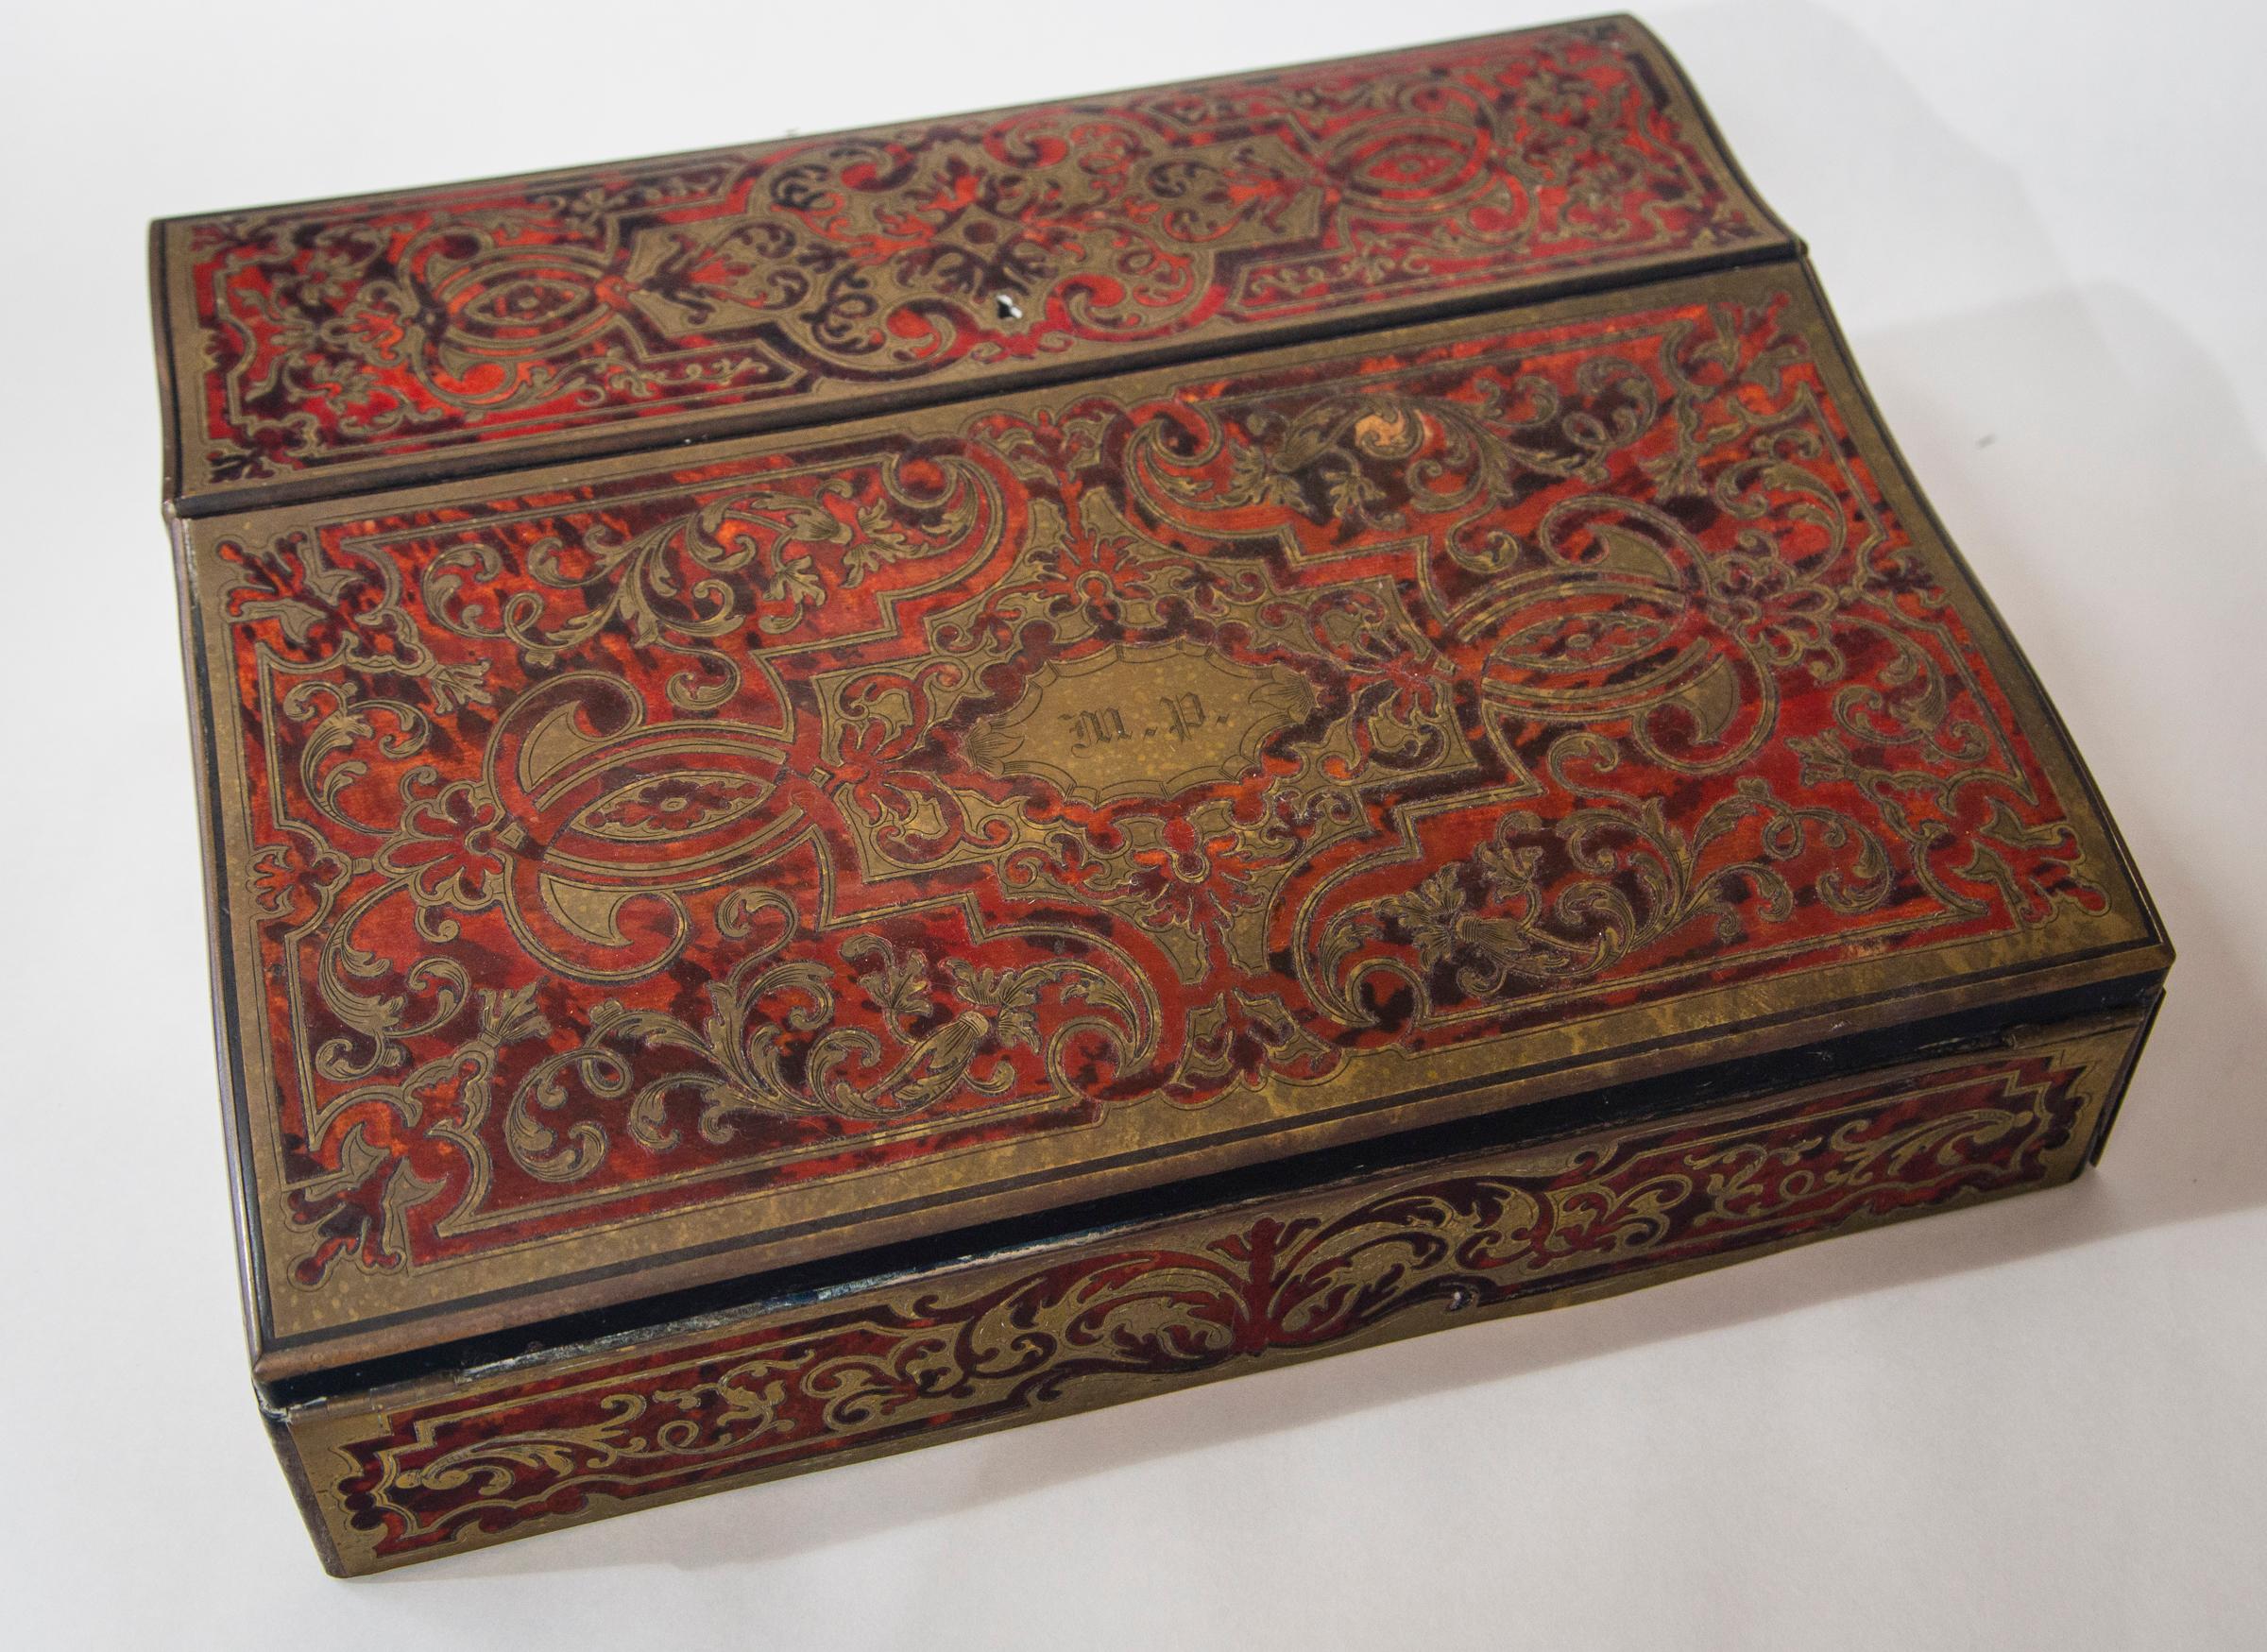 Dating from the era of Napoleon III. If tortoiseshell with inlays of brass scrolling.
The top opens for pens and ink bottles
The writing surface is a double fold out, now covered in blue velvet. The lower writing surface lifts up for storage of